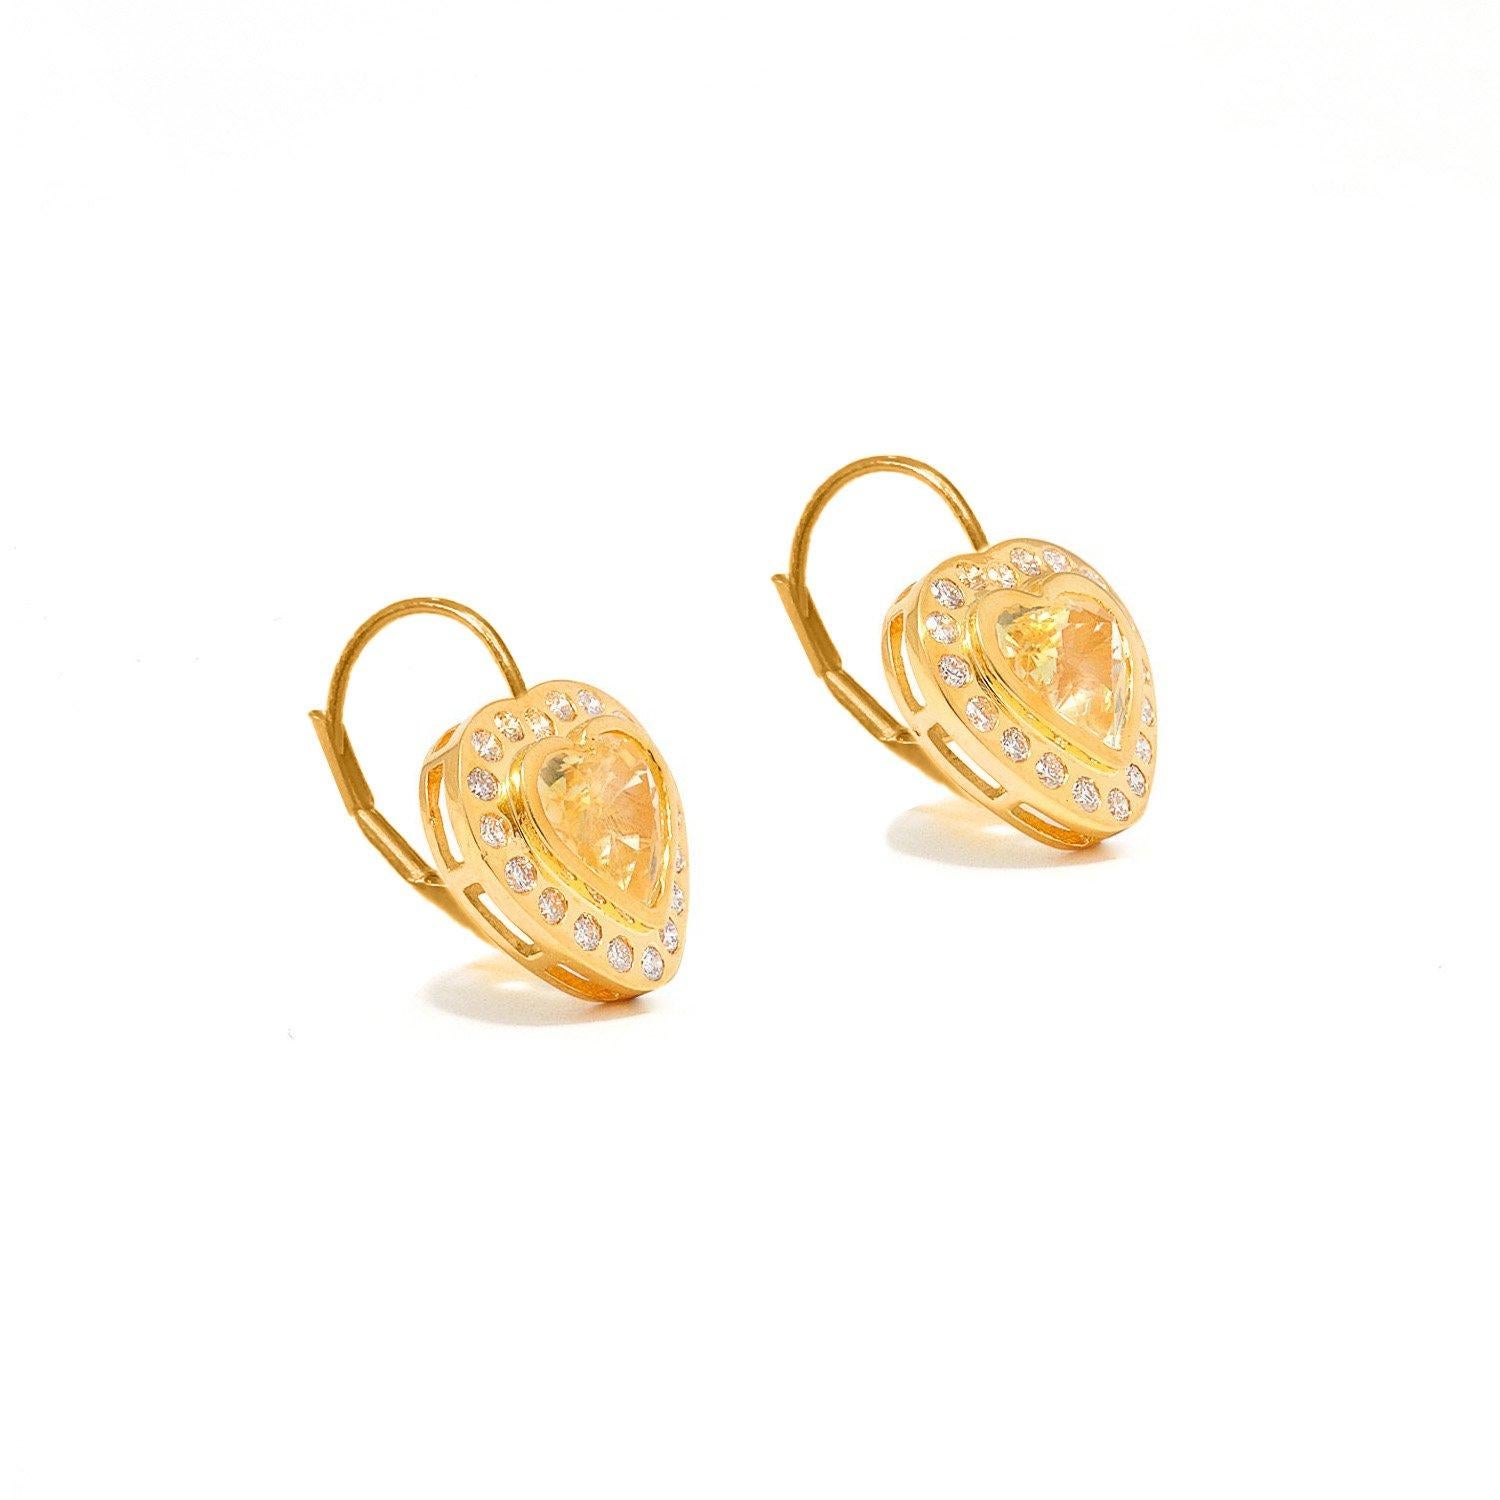 
Luminous Yellow Sapphires of exceptional luster and clarity in a modern bezel setting whose beauty is further enhanced by Brilliant Cut White Diamonds set into perfect, heart-shaped drop earrings of 18 Karat Gold.

- Natural Yellow Sapphires weight